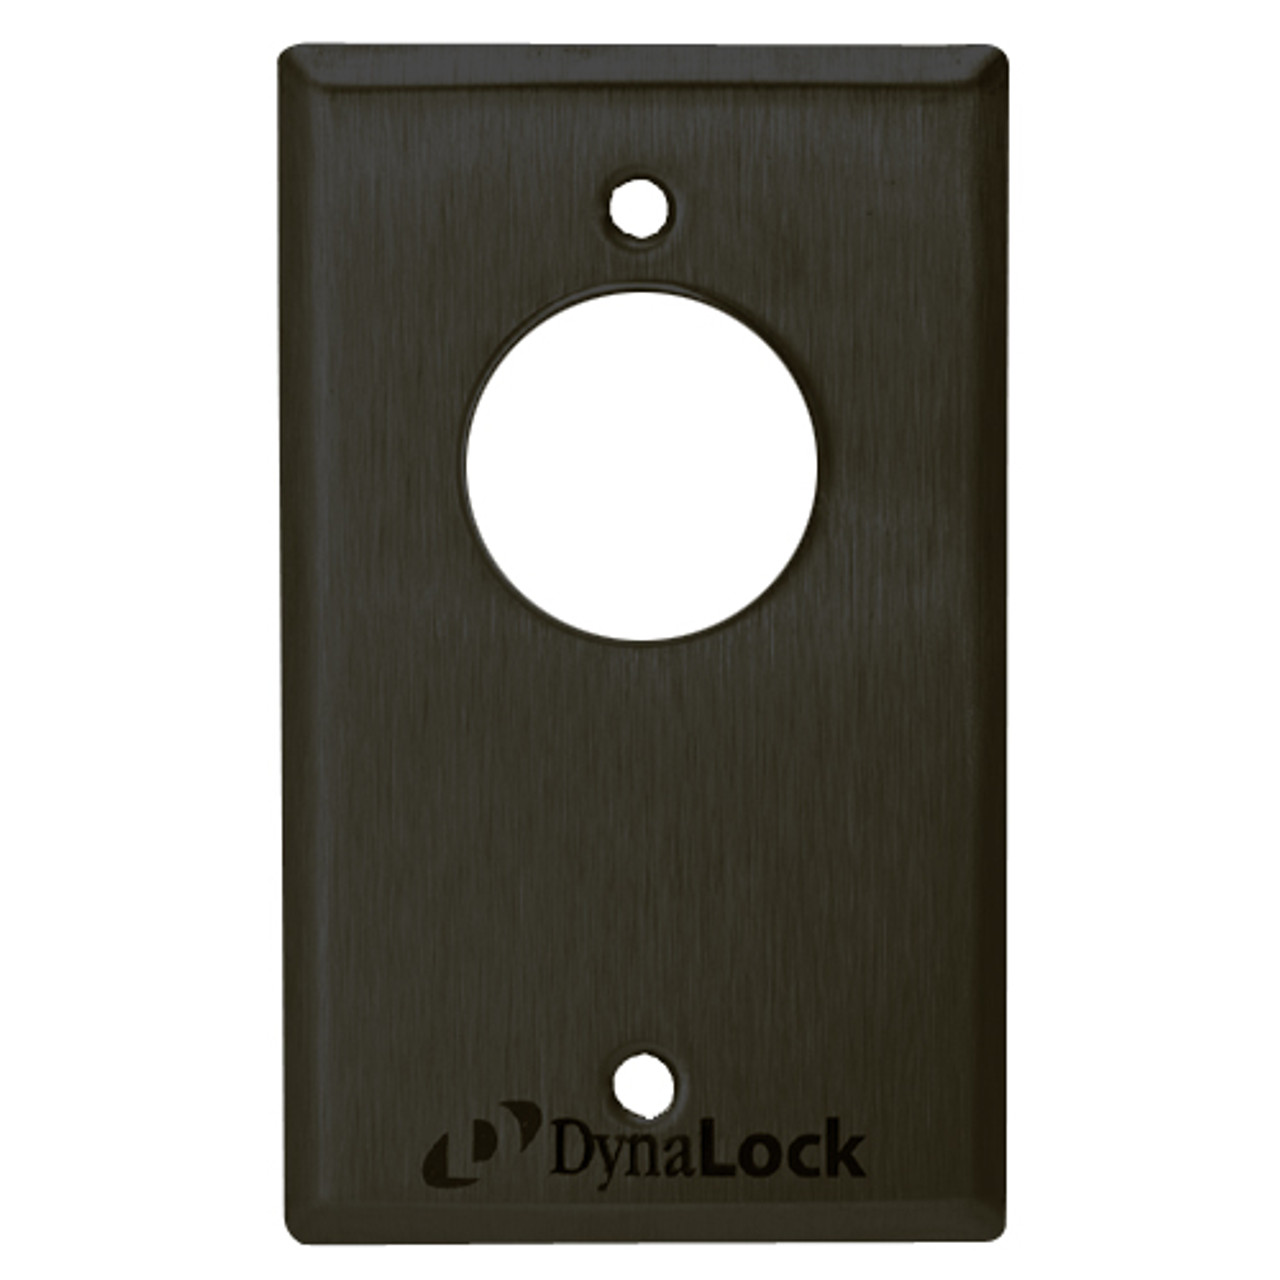 7002-US10B-LED DynaLock 7000 Series Keyswitches Momentary 1 Single Pole Double Throw with Bi-Color LED in Oil Rubbed Bronze